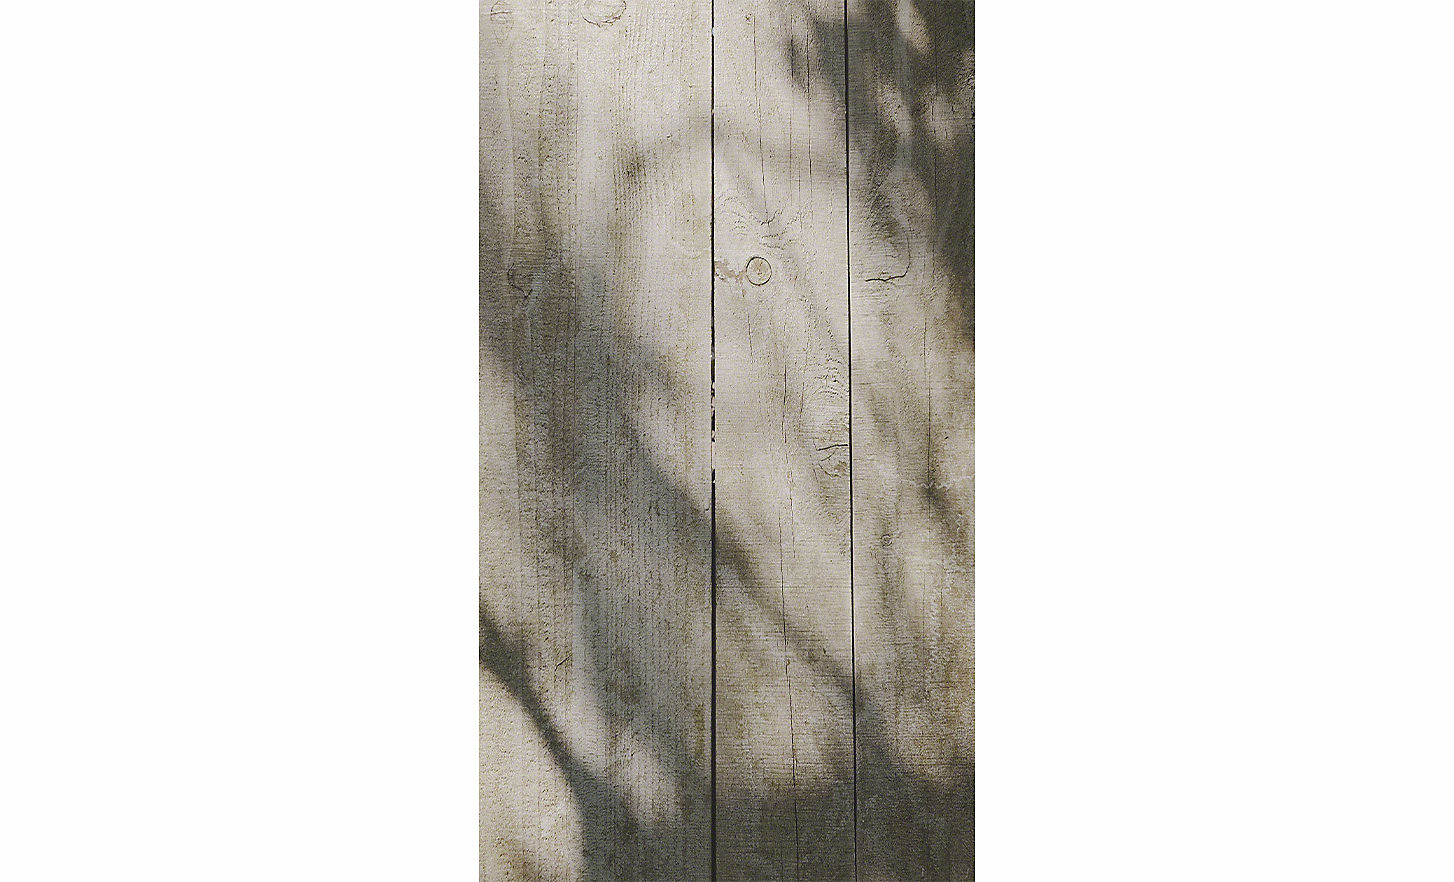 Image of wooden planks with a shadow from a tree on them